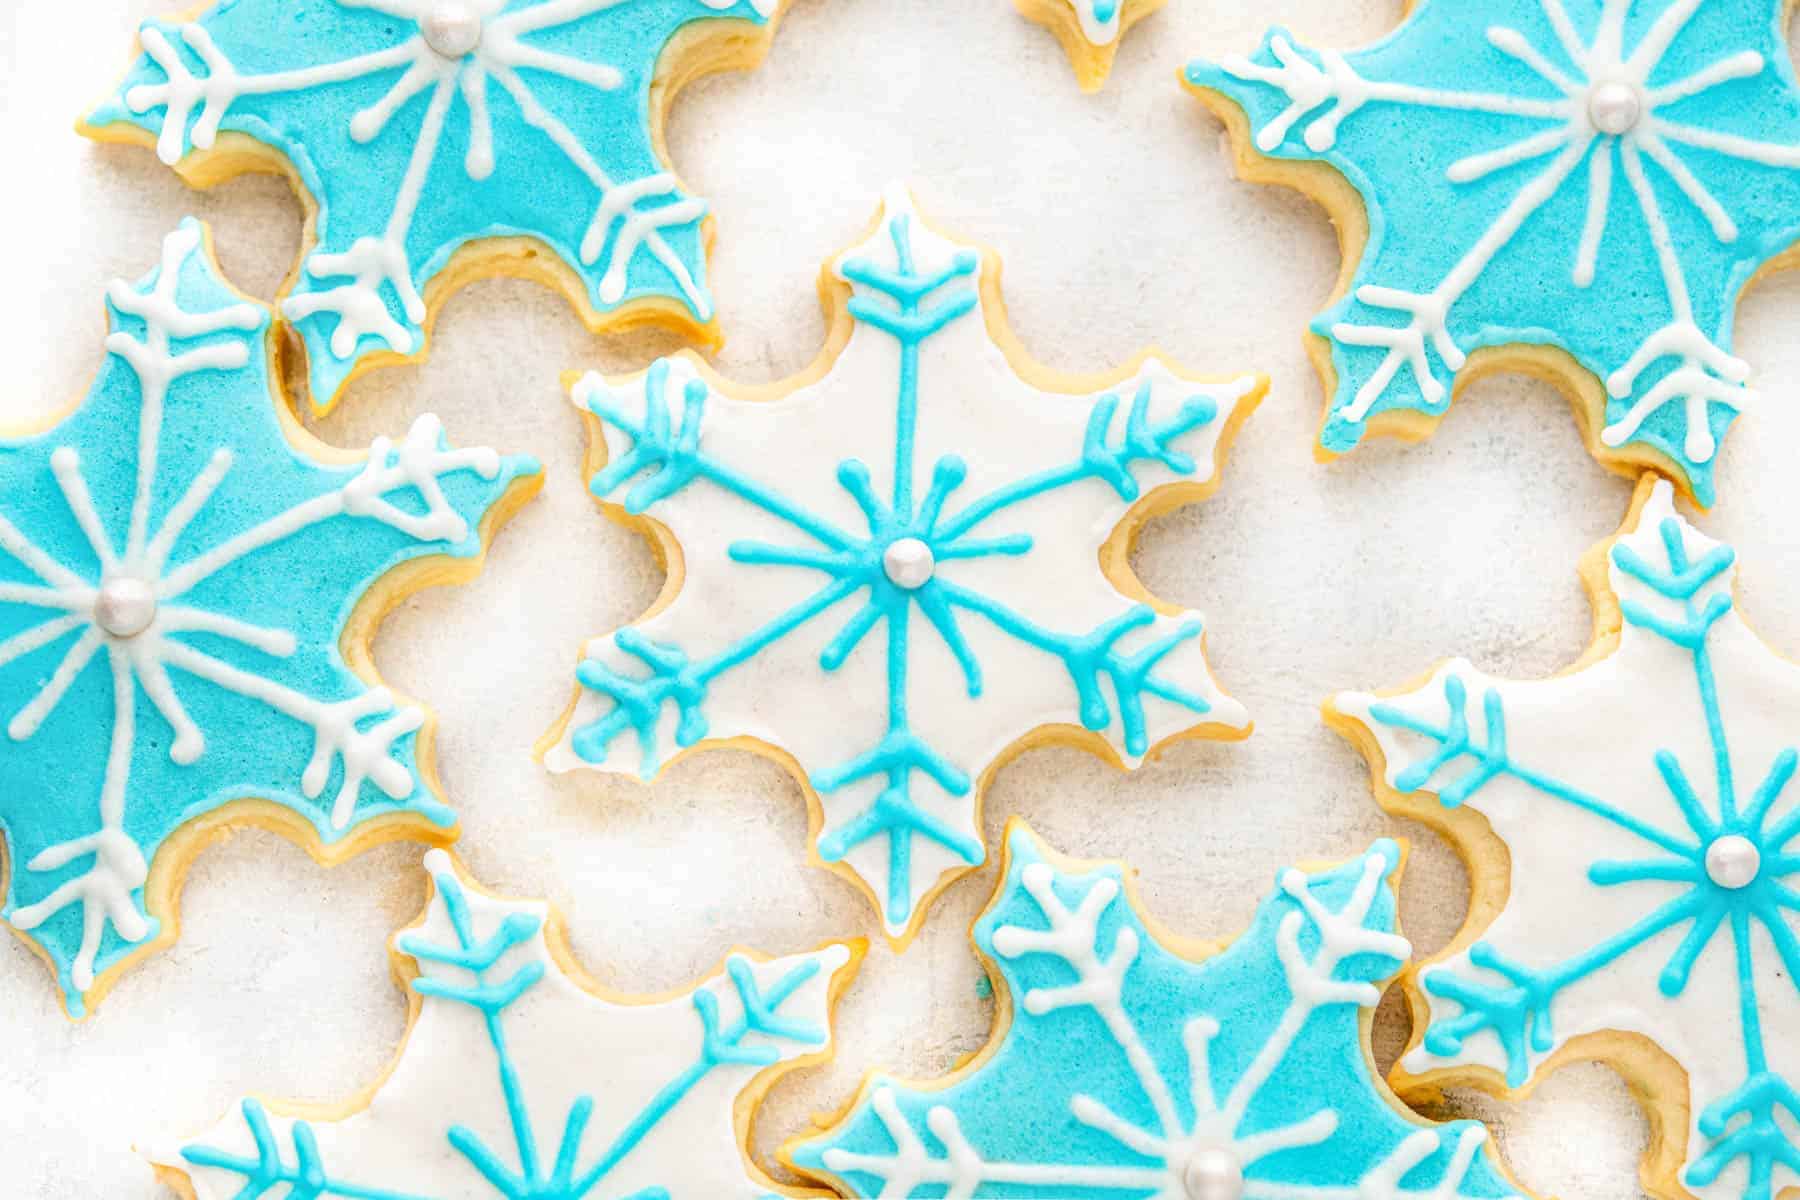 Festive blue and white sugar cookies shaped like snowflakes on a white background.